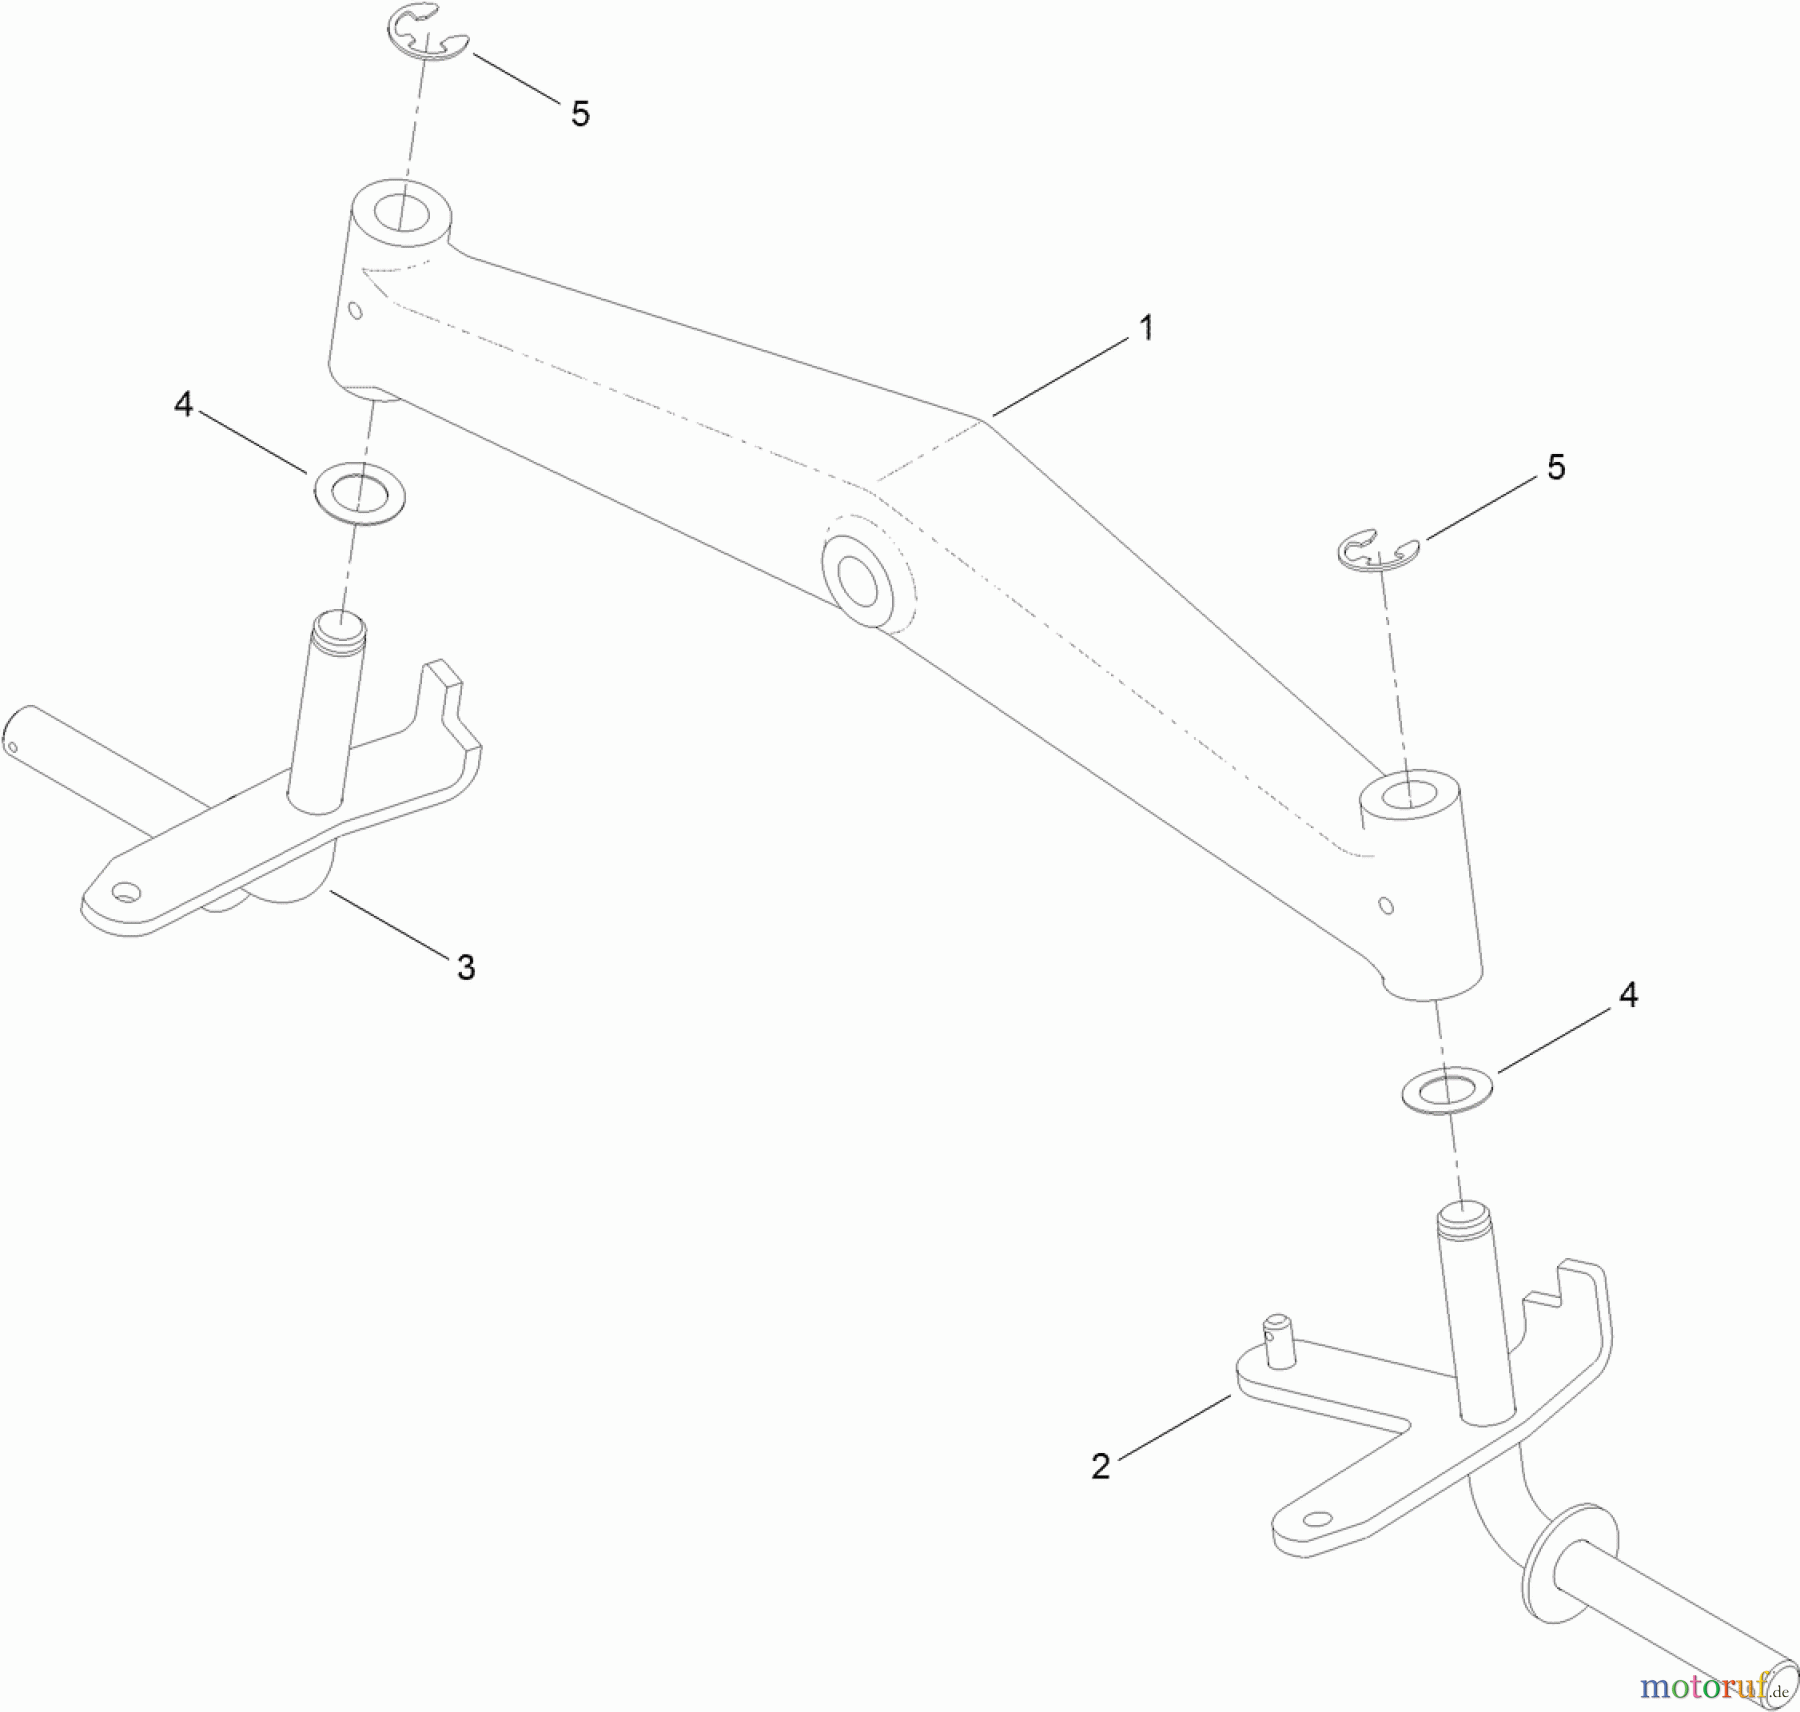  Toro Neu Mowers, Lawn & Garden Tractor Seite 1 71254 (XLS 380) - Toro XLS 380 Lawn Tractor, 2011 (311000001-311999999) FRONT AXLE ASSEMBLY